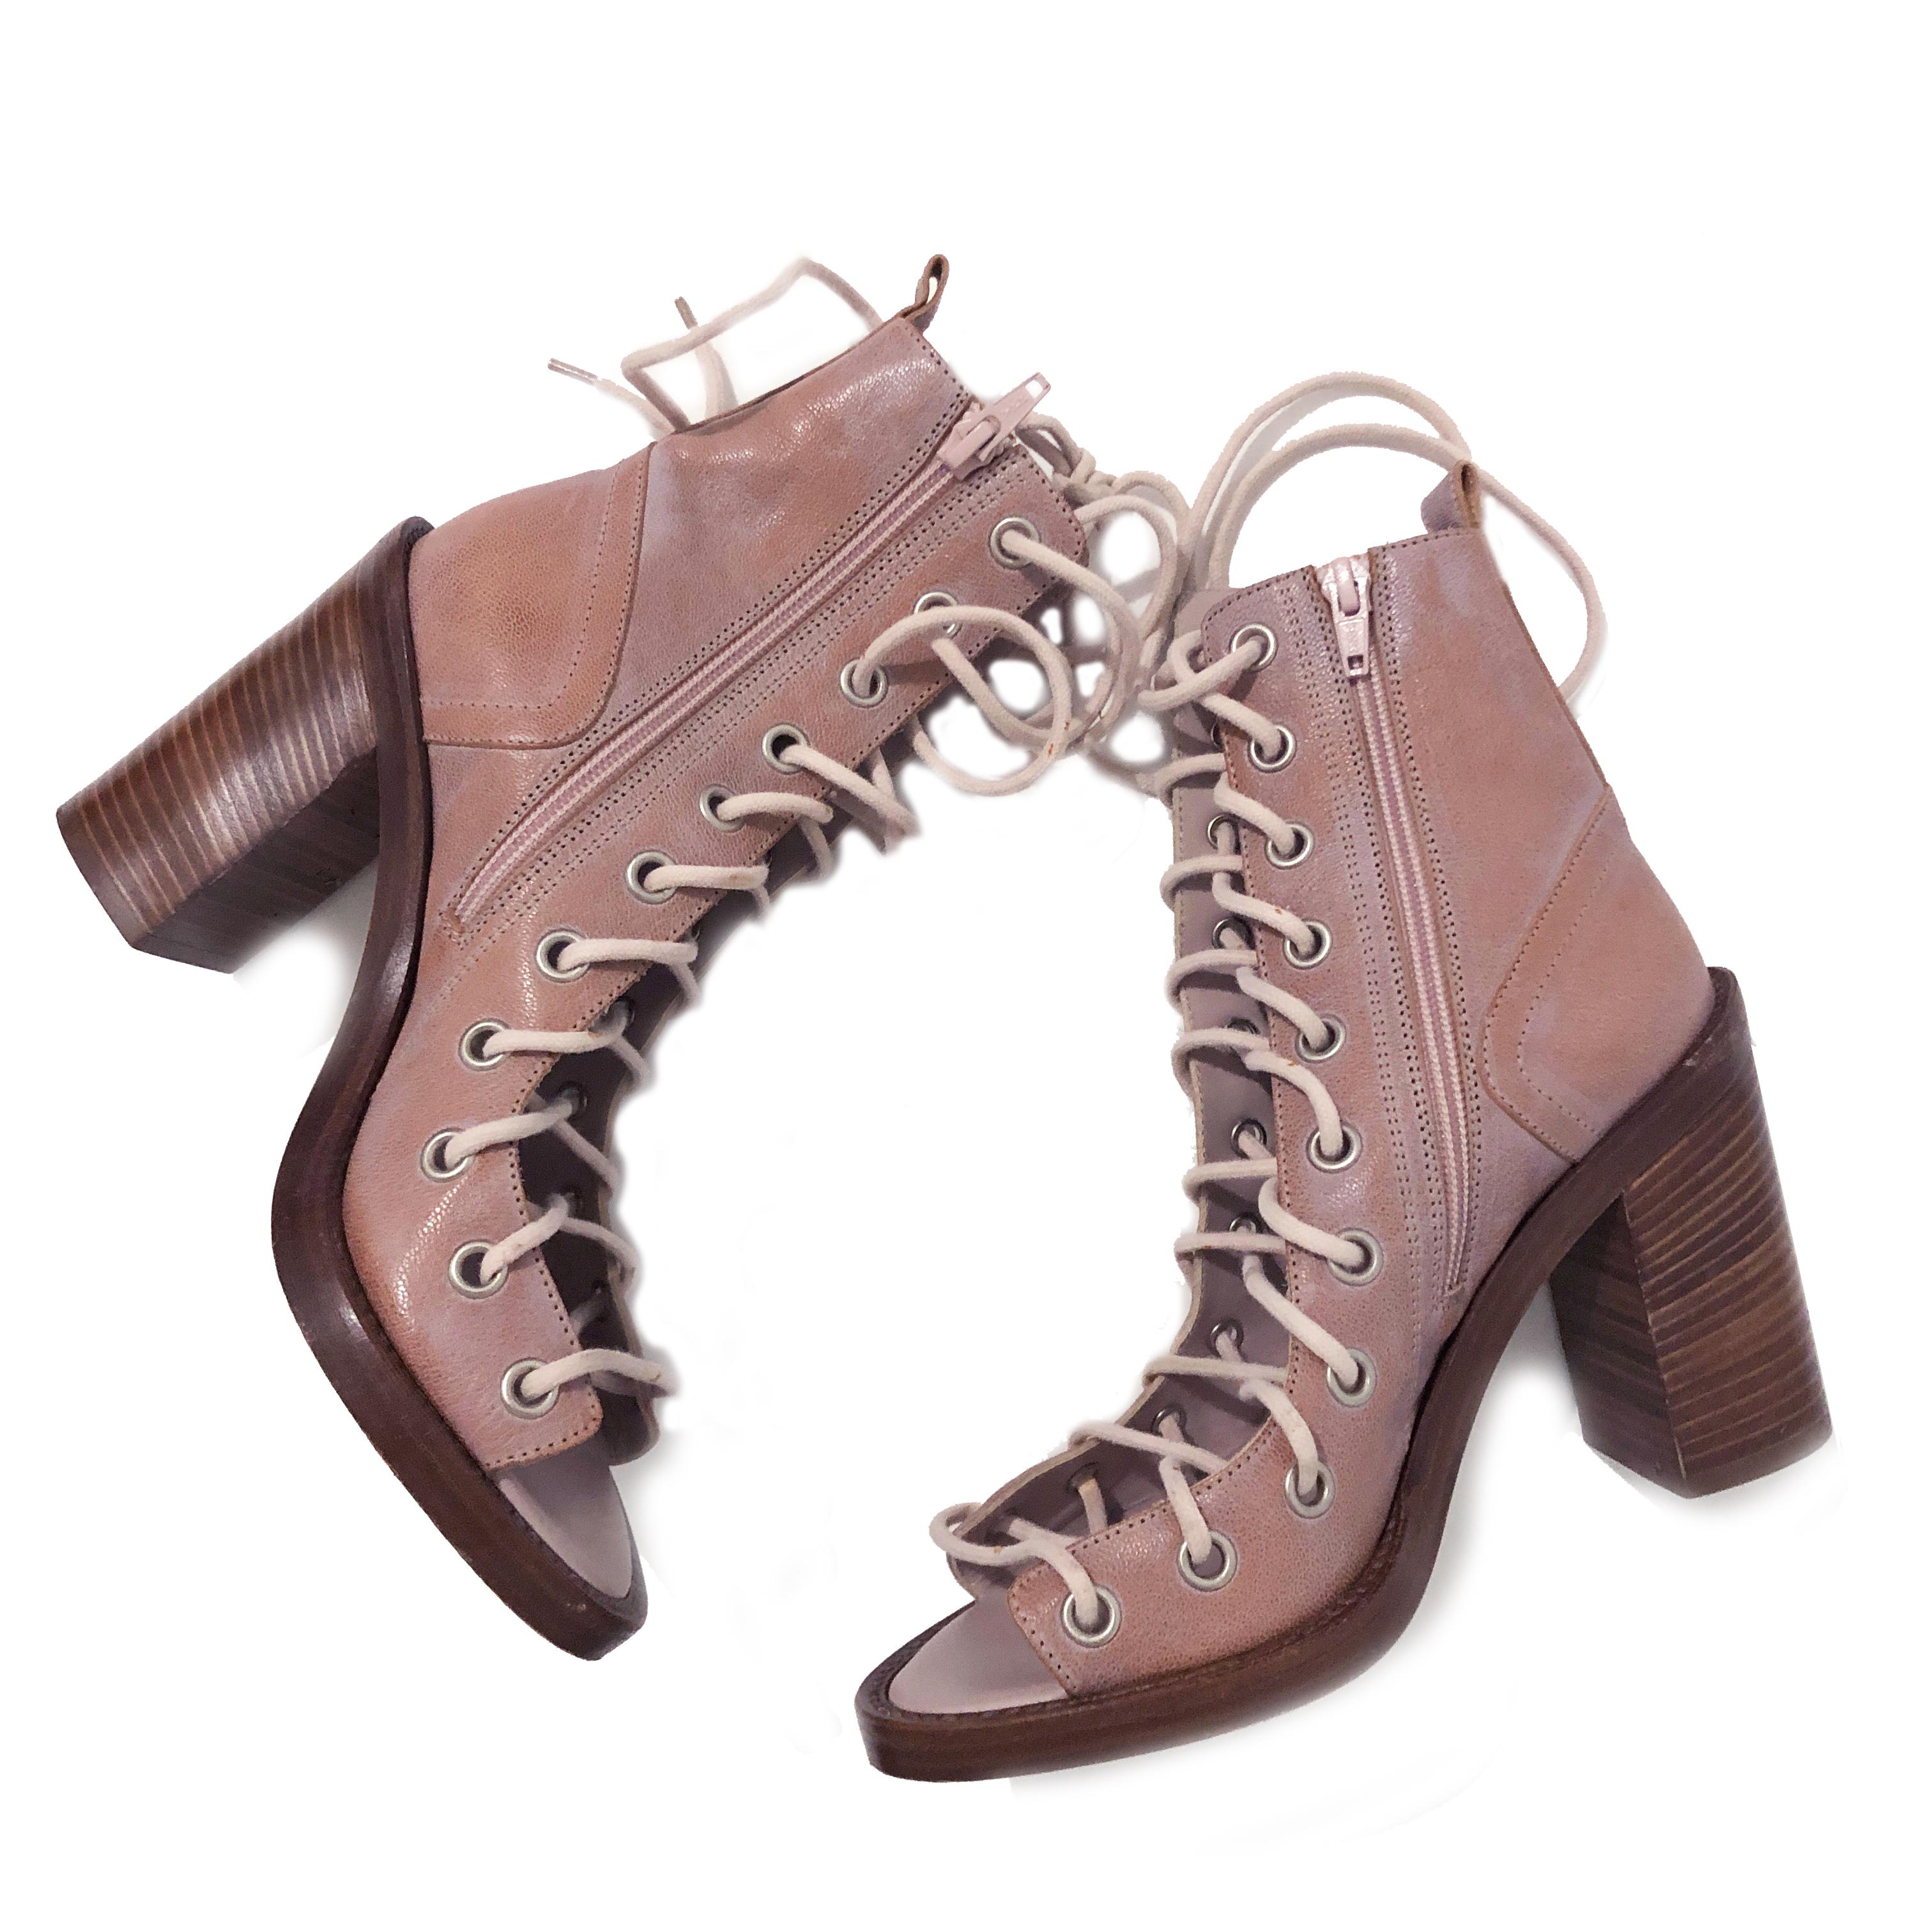 Authentic, preowned Ann Demeulemeester Lace Up Ankle Booties size 37.5. Made from distressed pink leather, these fabulous booties feature an open toe, a chunky high heel and a front lace-up fastening. 

Perfect for spring and summer! 

Made in